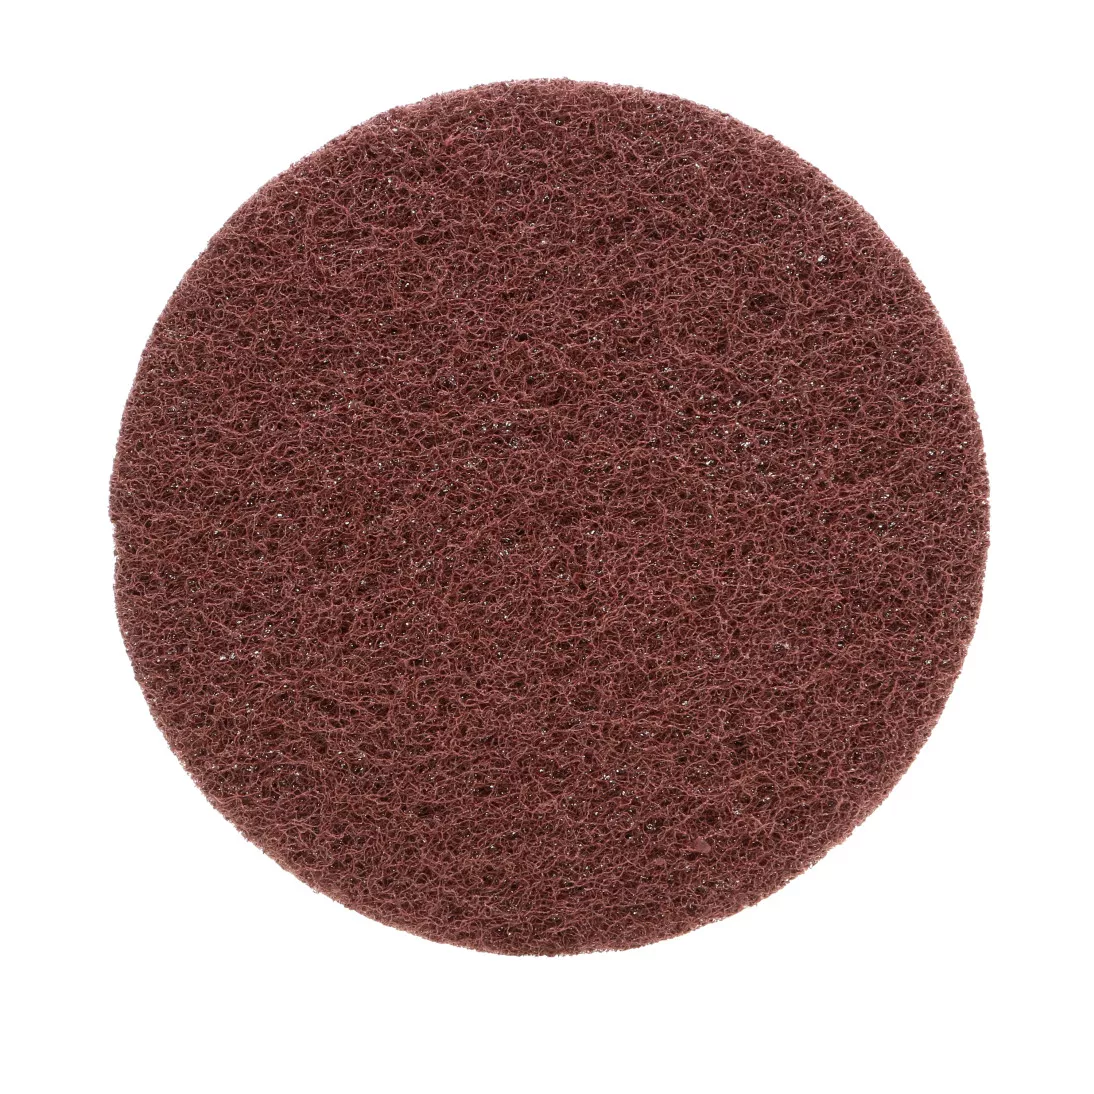 Standard Abrasives™ Buff and Blend Hook and Loop GP Vacuum Disc, 831710,
6 in A MED, 10 per case